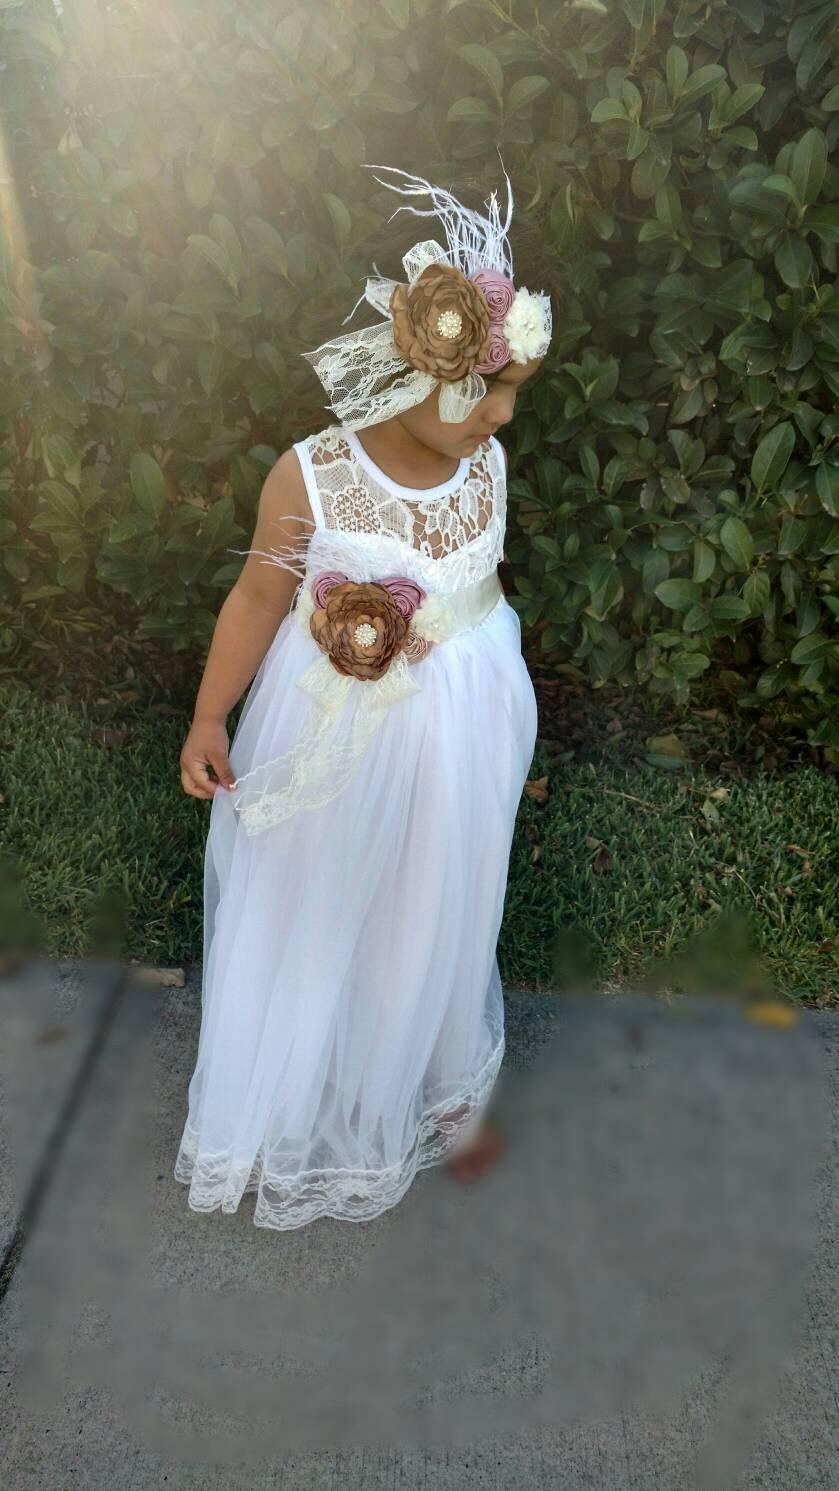 Hochzeit - Perfect White Tulle with Ivory Lace Flowergirl Dress for Wedding Christening Baptism  Birthday Party or any Special Occasions.